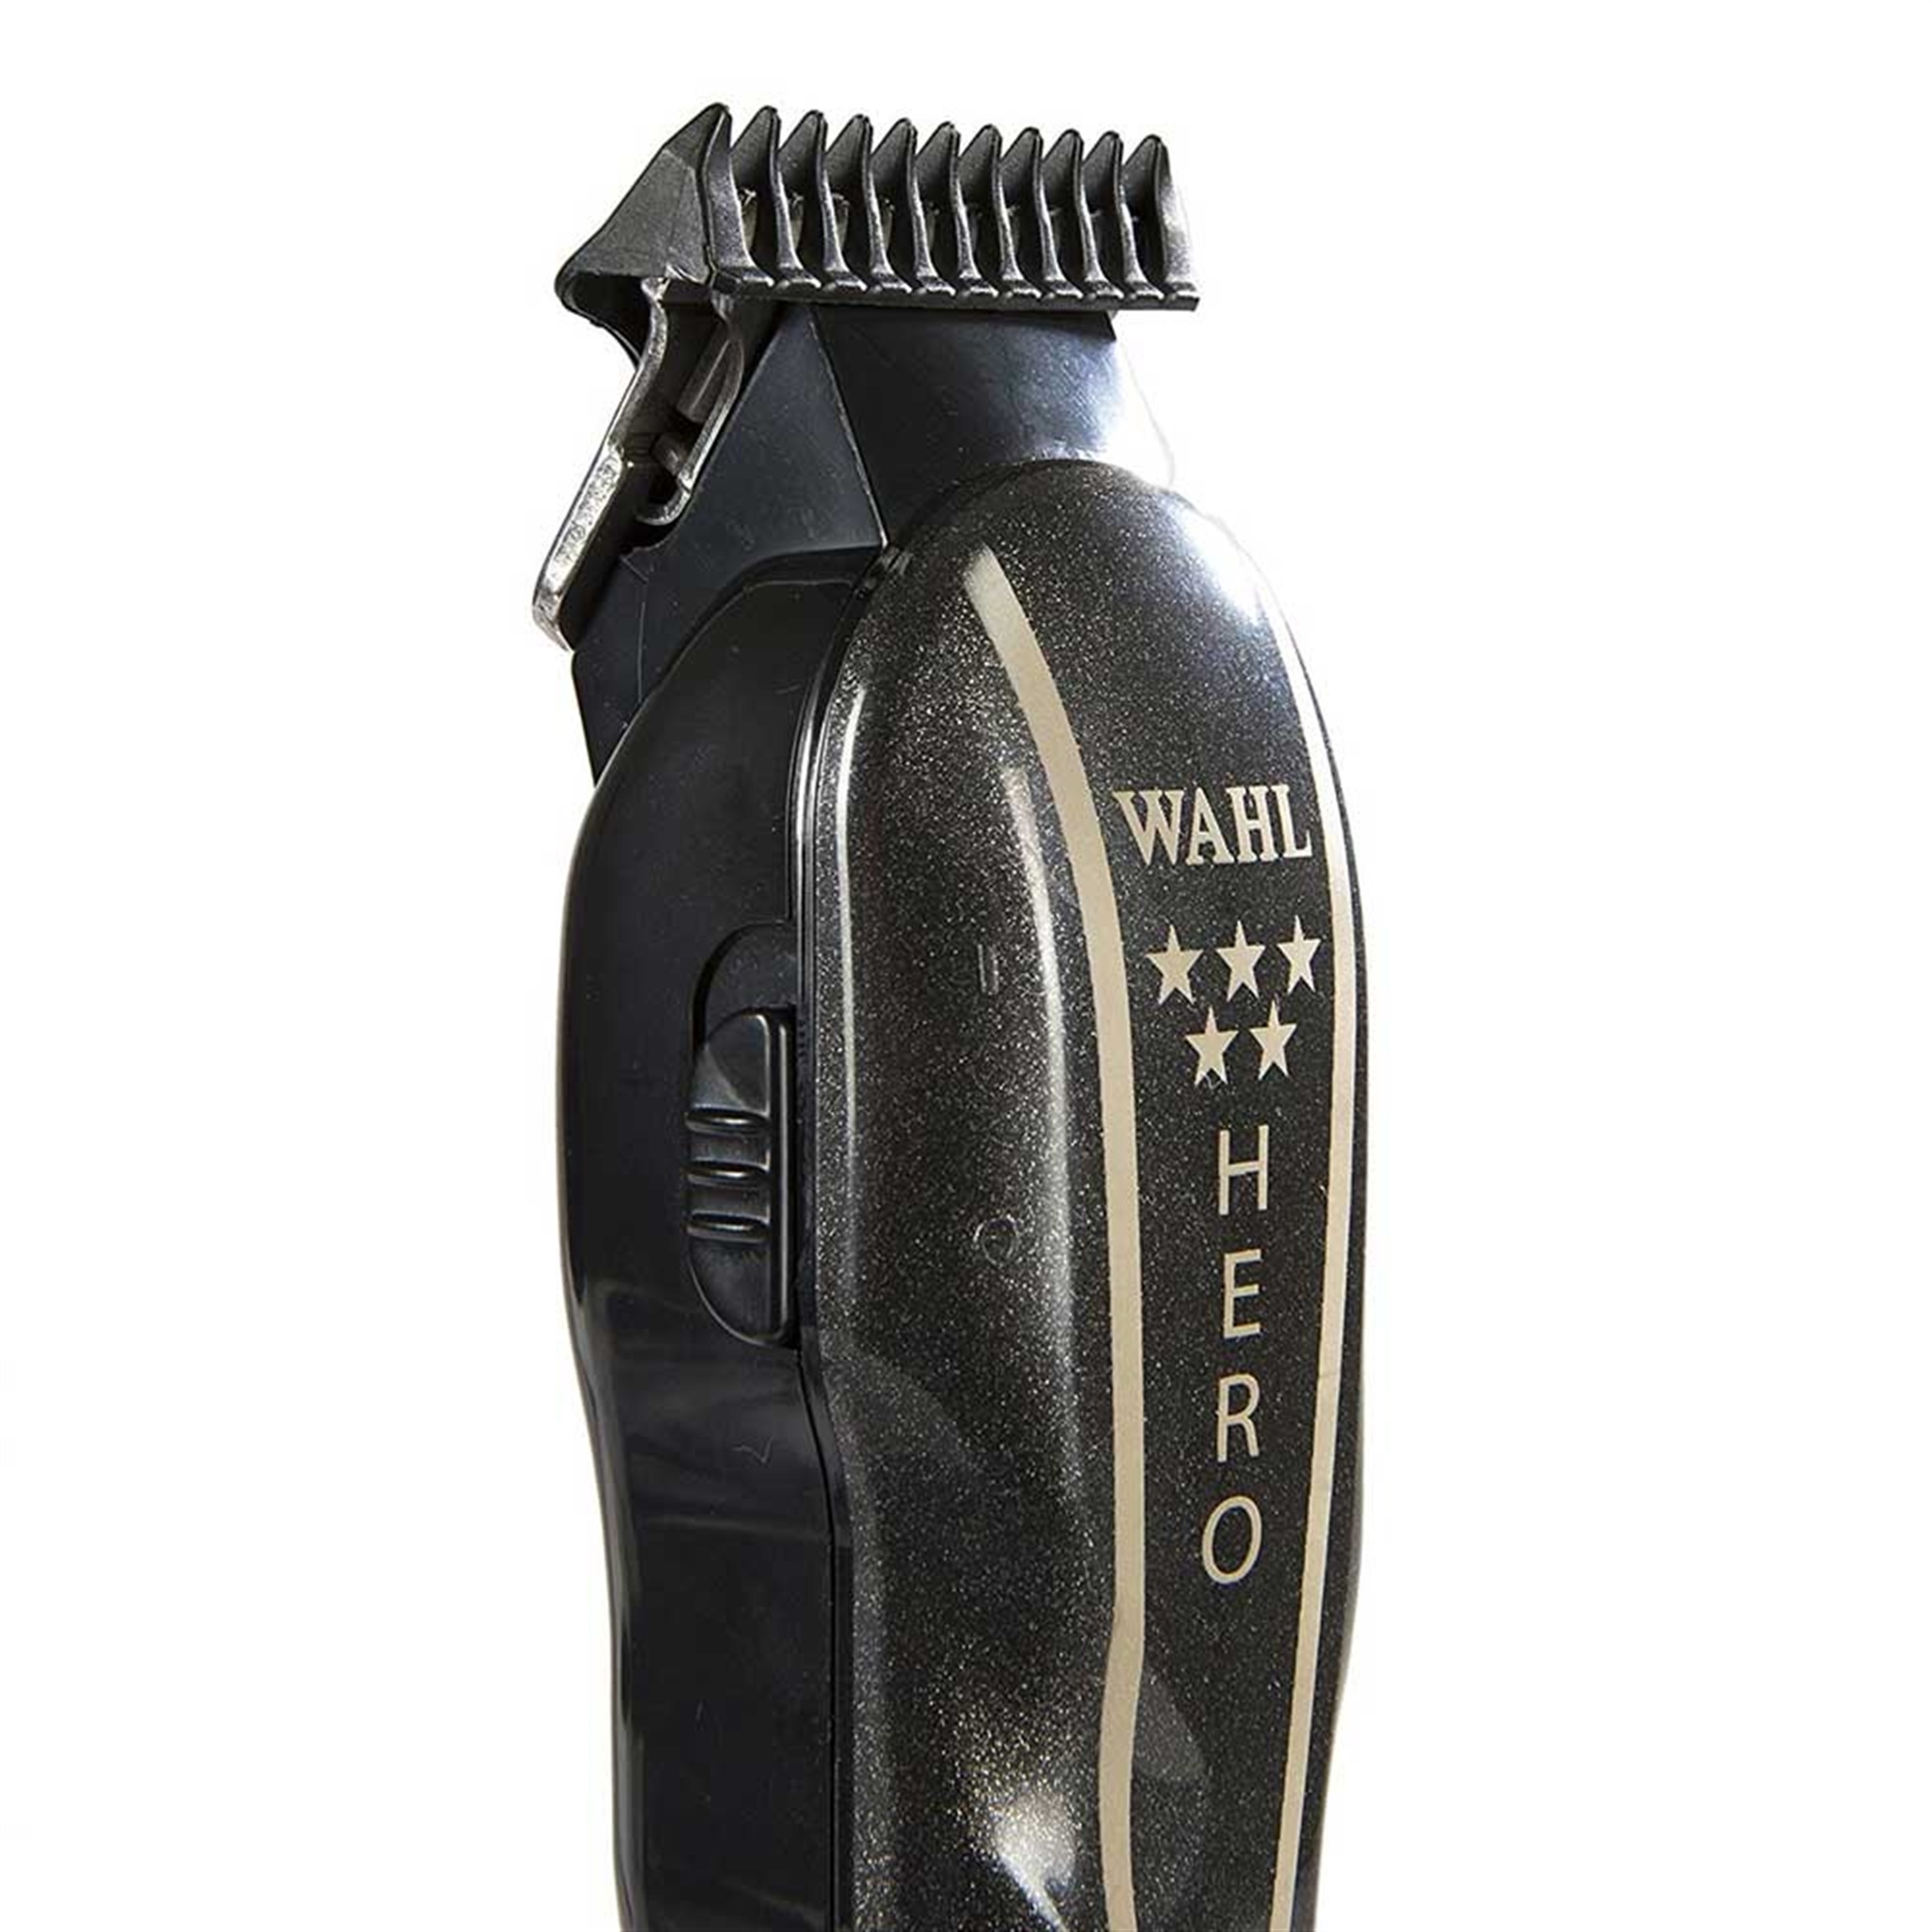 Wahl Professional Trimmer HERO & Hair Clipper LEGEND 5 Star Barber Combo 8180 with Wahl Professional Sterling Finish Limited Edi